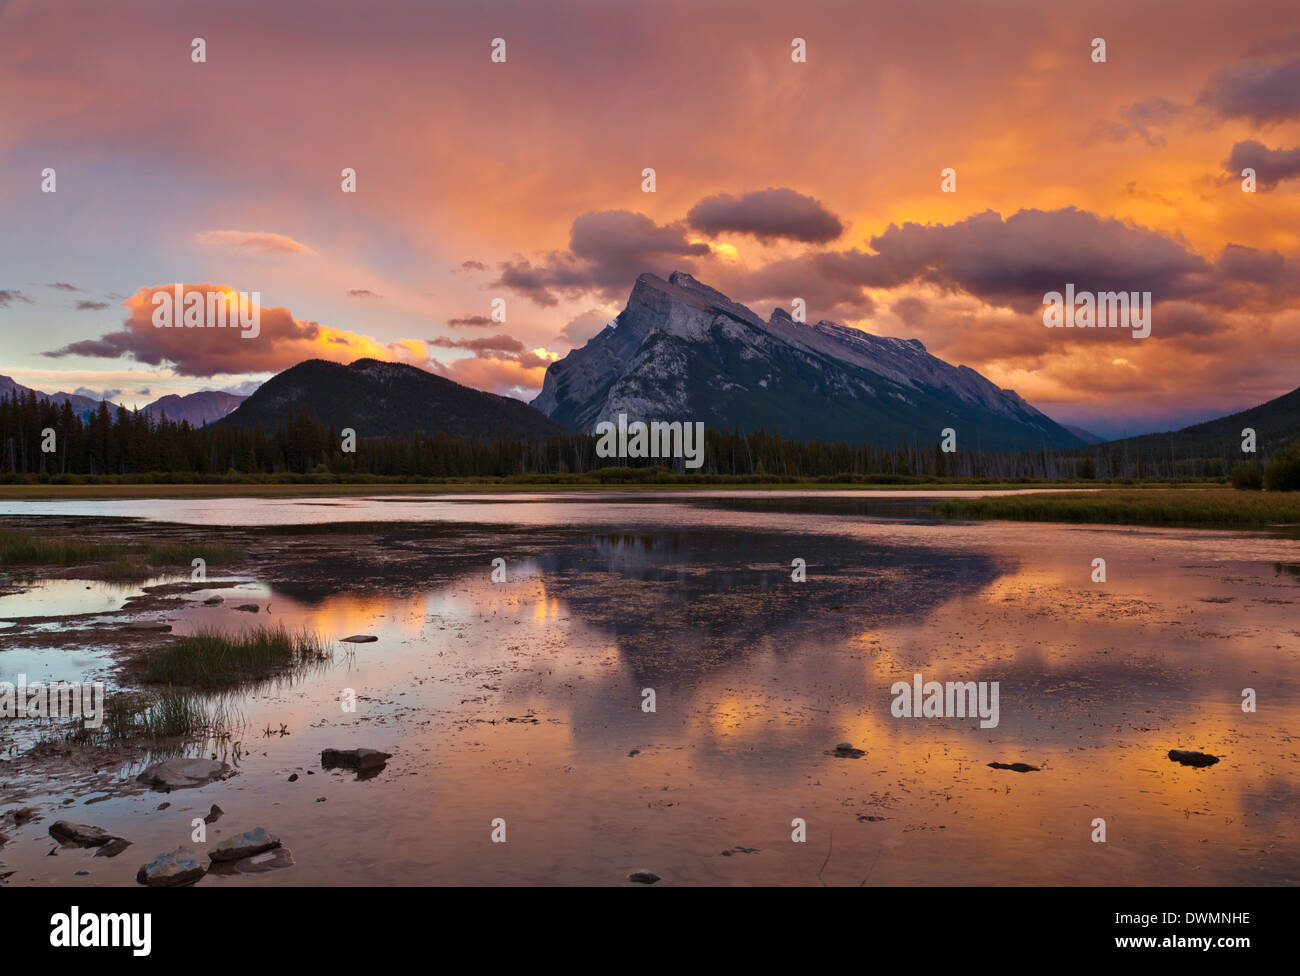 Mount Rundle rising above Vermillion Lakes drive at sunset, Banff National Park, UNESCO Site, Alberta, Canadian Rockies, Canada Stock Photo